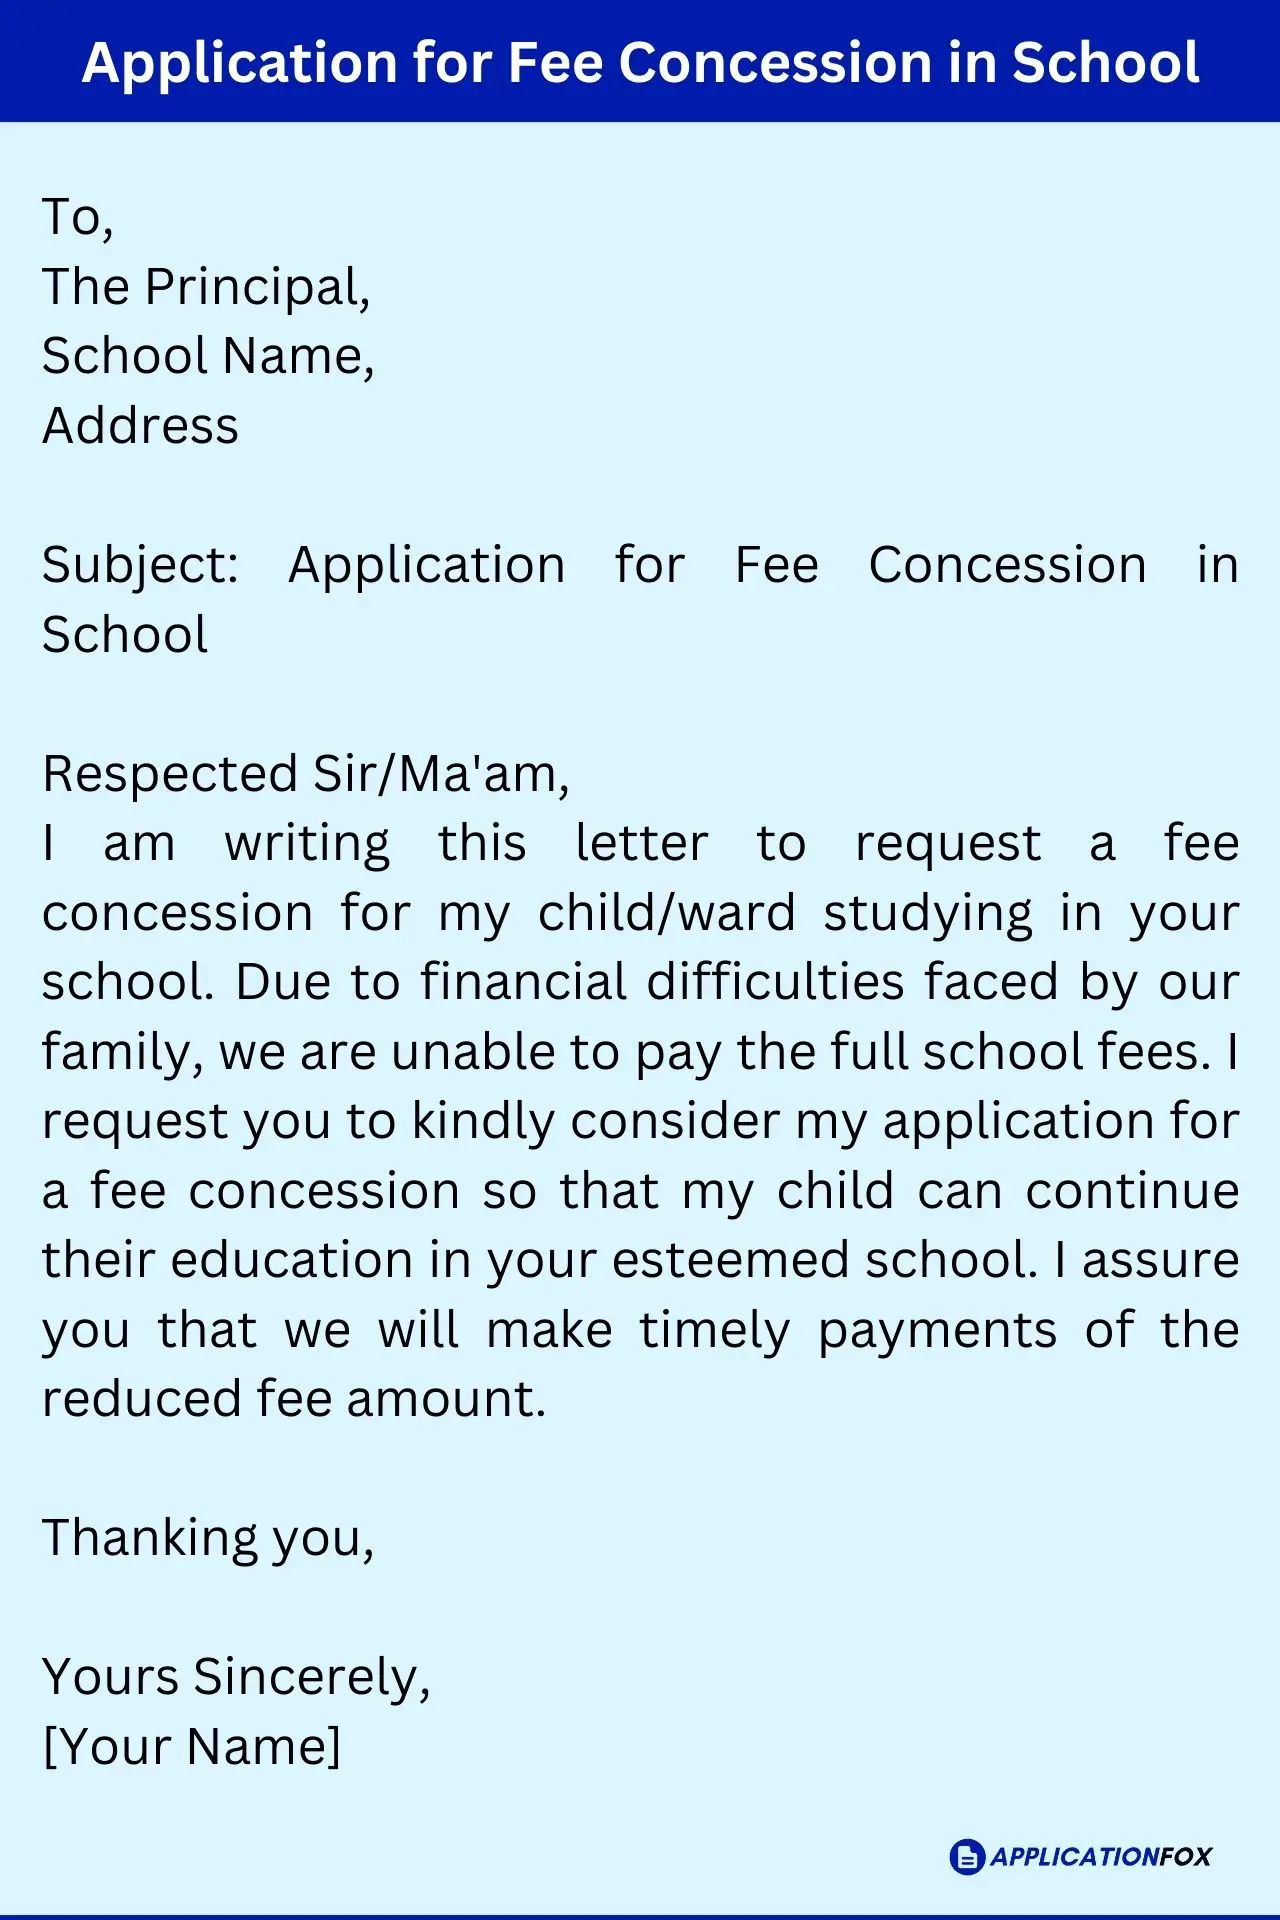 Application for Fee Concession in School